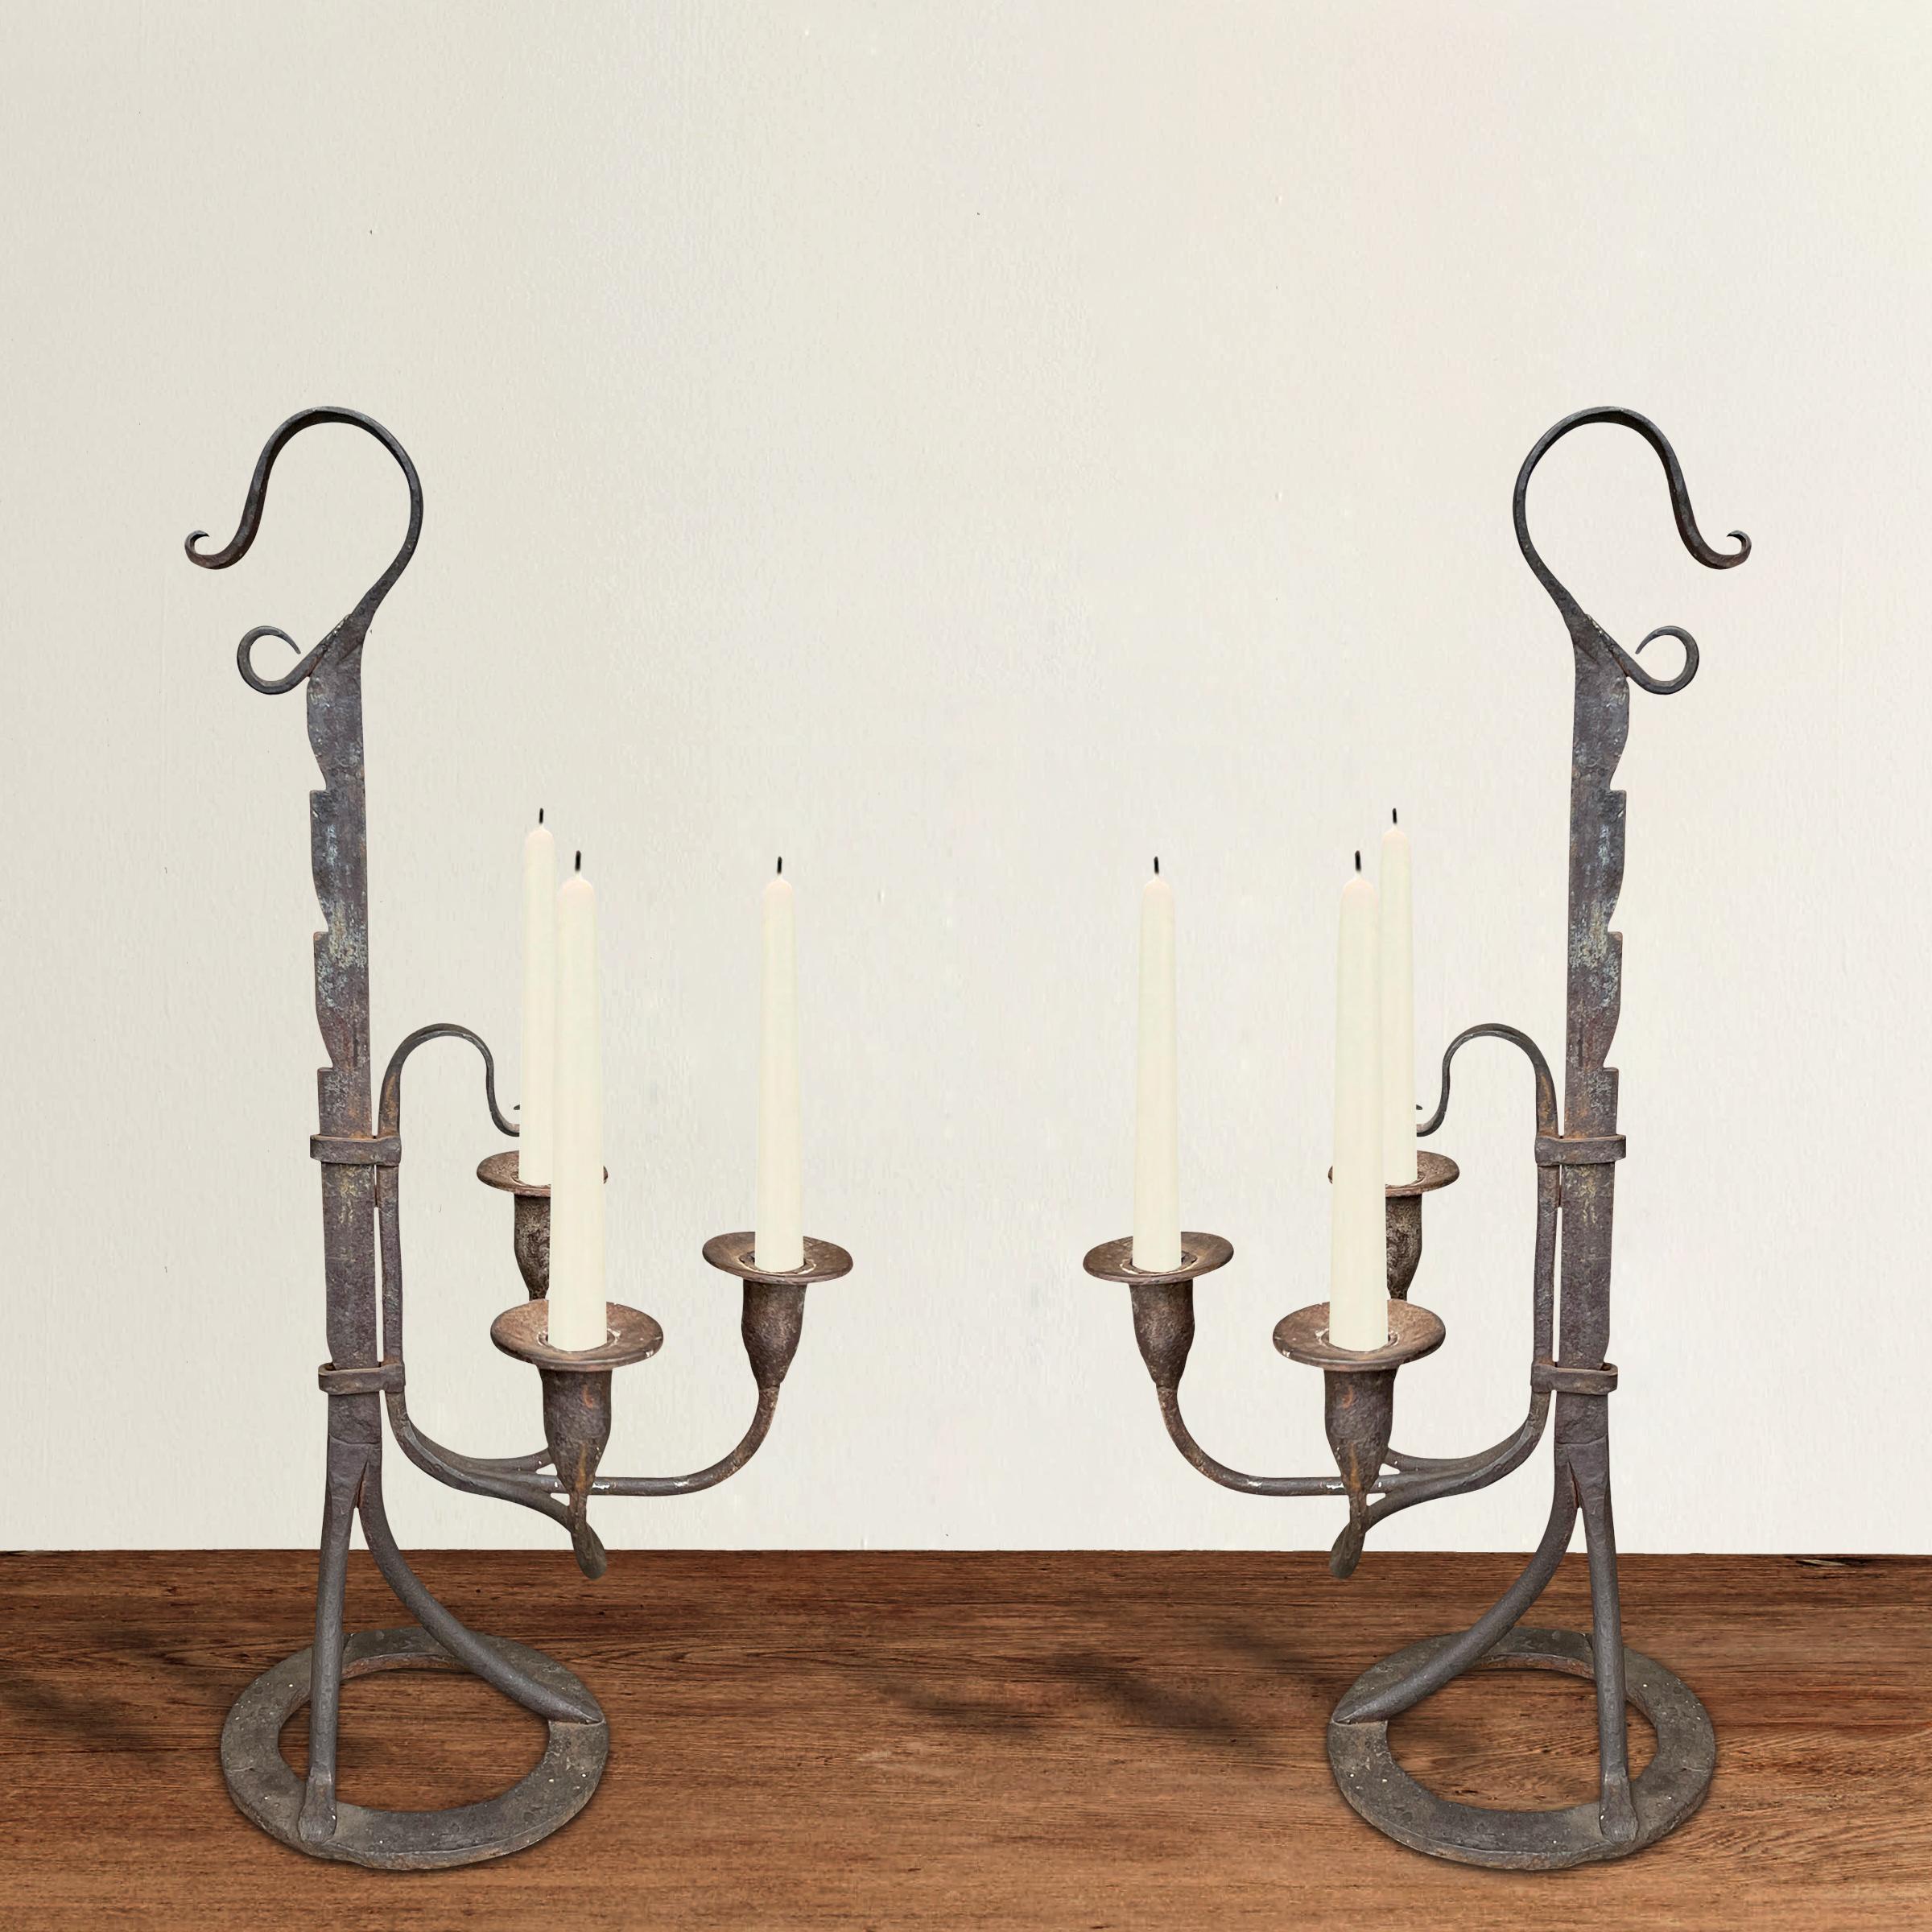 An incredible pair of 18th century American wrought iron three-arm candelabra each adjustable in height by pulling the arms up the ratchet stems, and resting on round disc feet. Charming and strong in design!